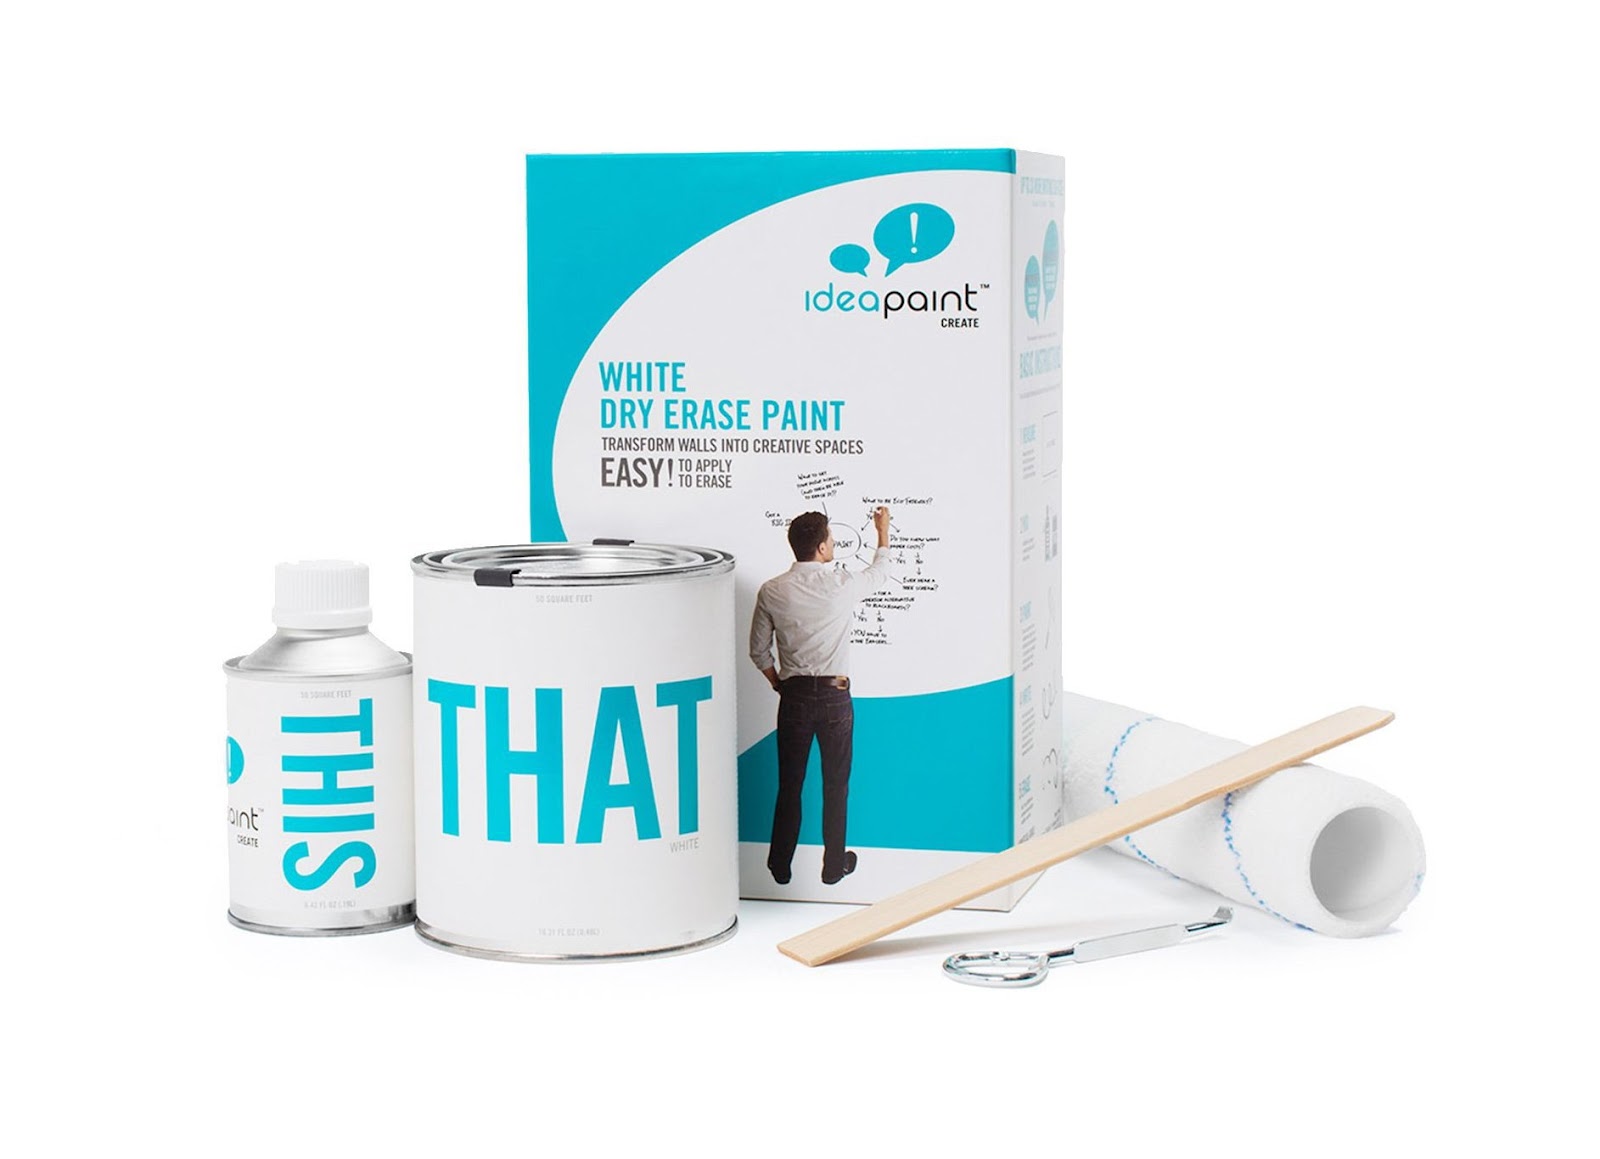 IdeaPaint White Dry Erase Paint (Whiteboard Paint) that anyone can install